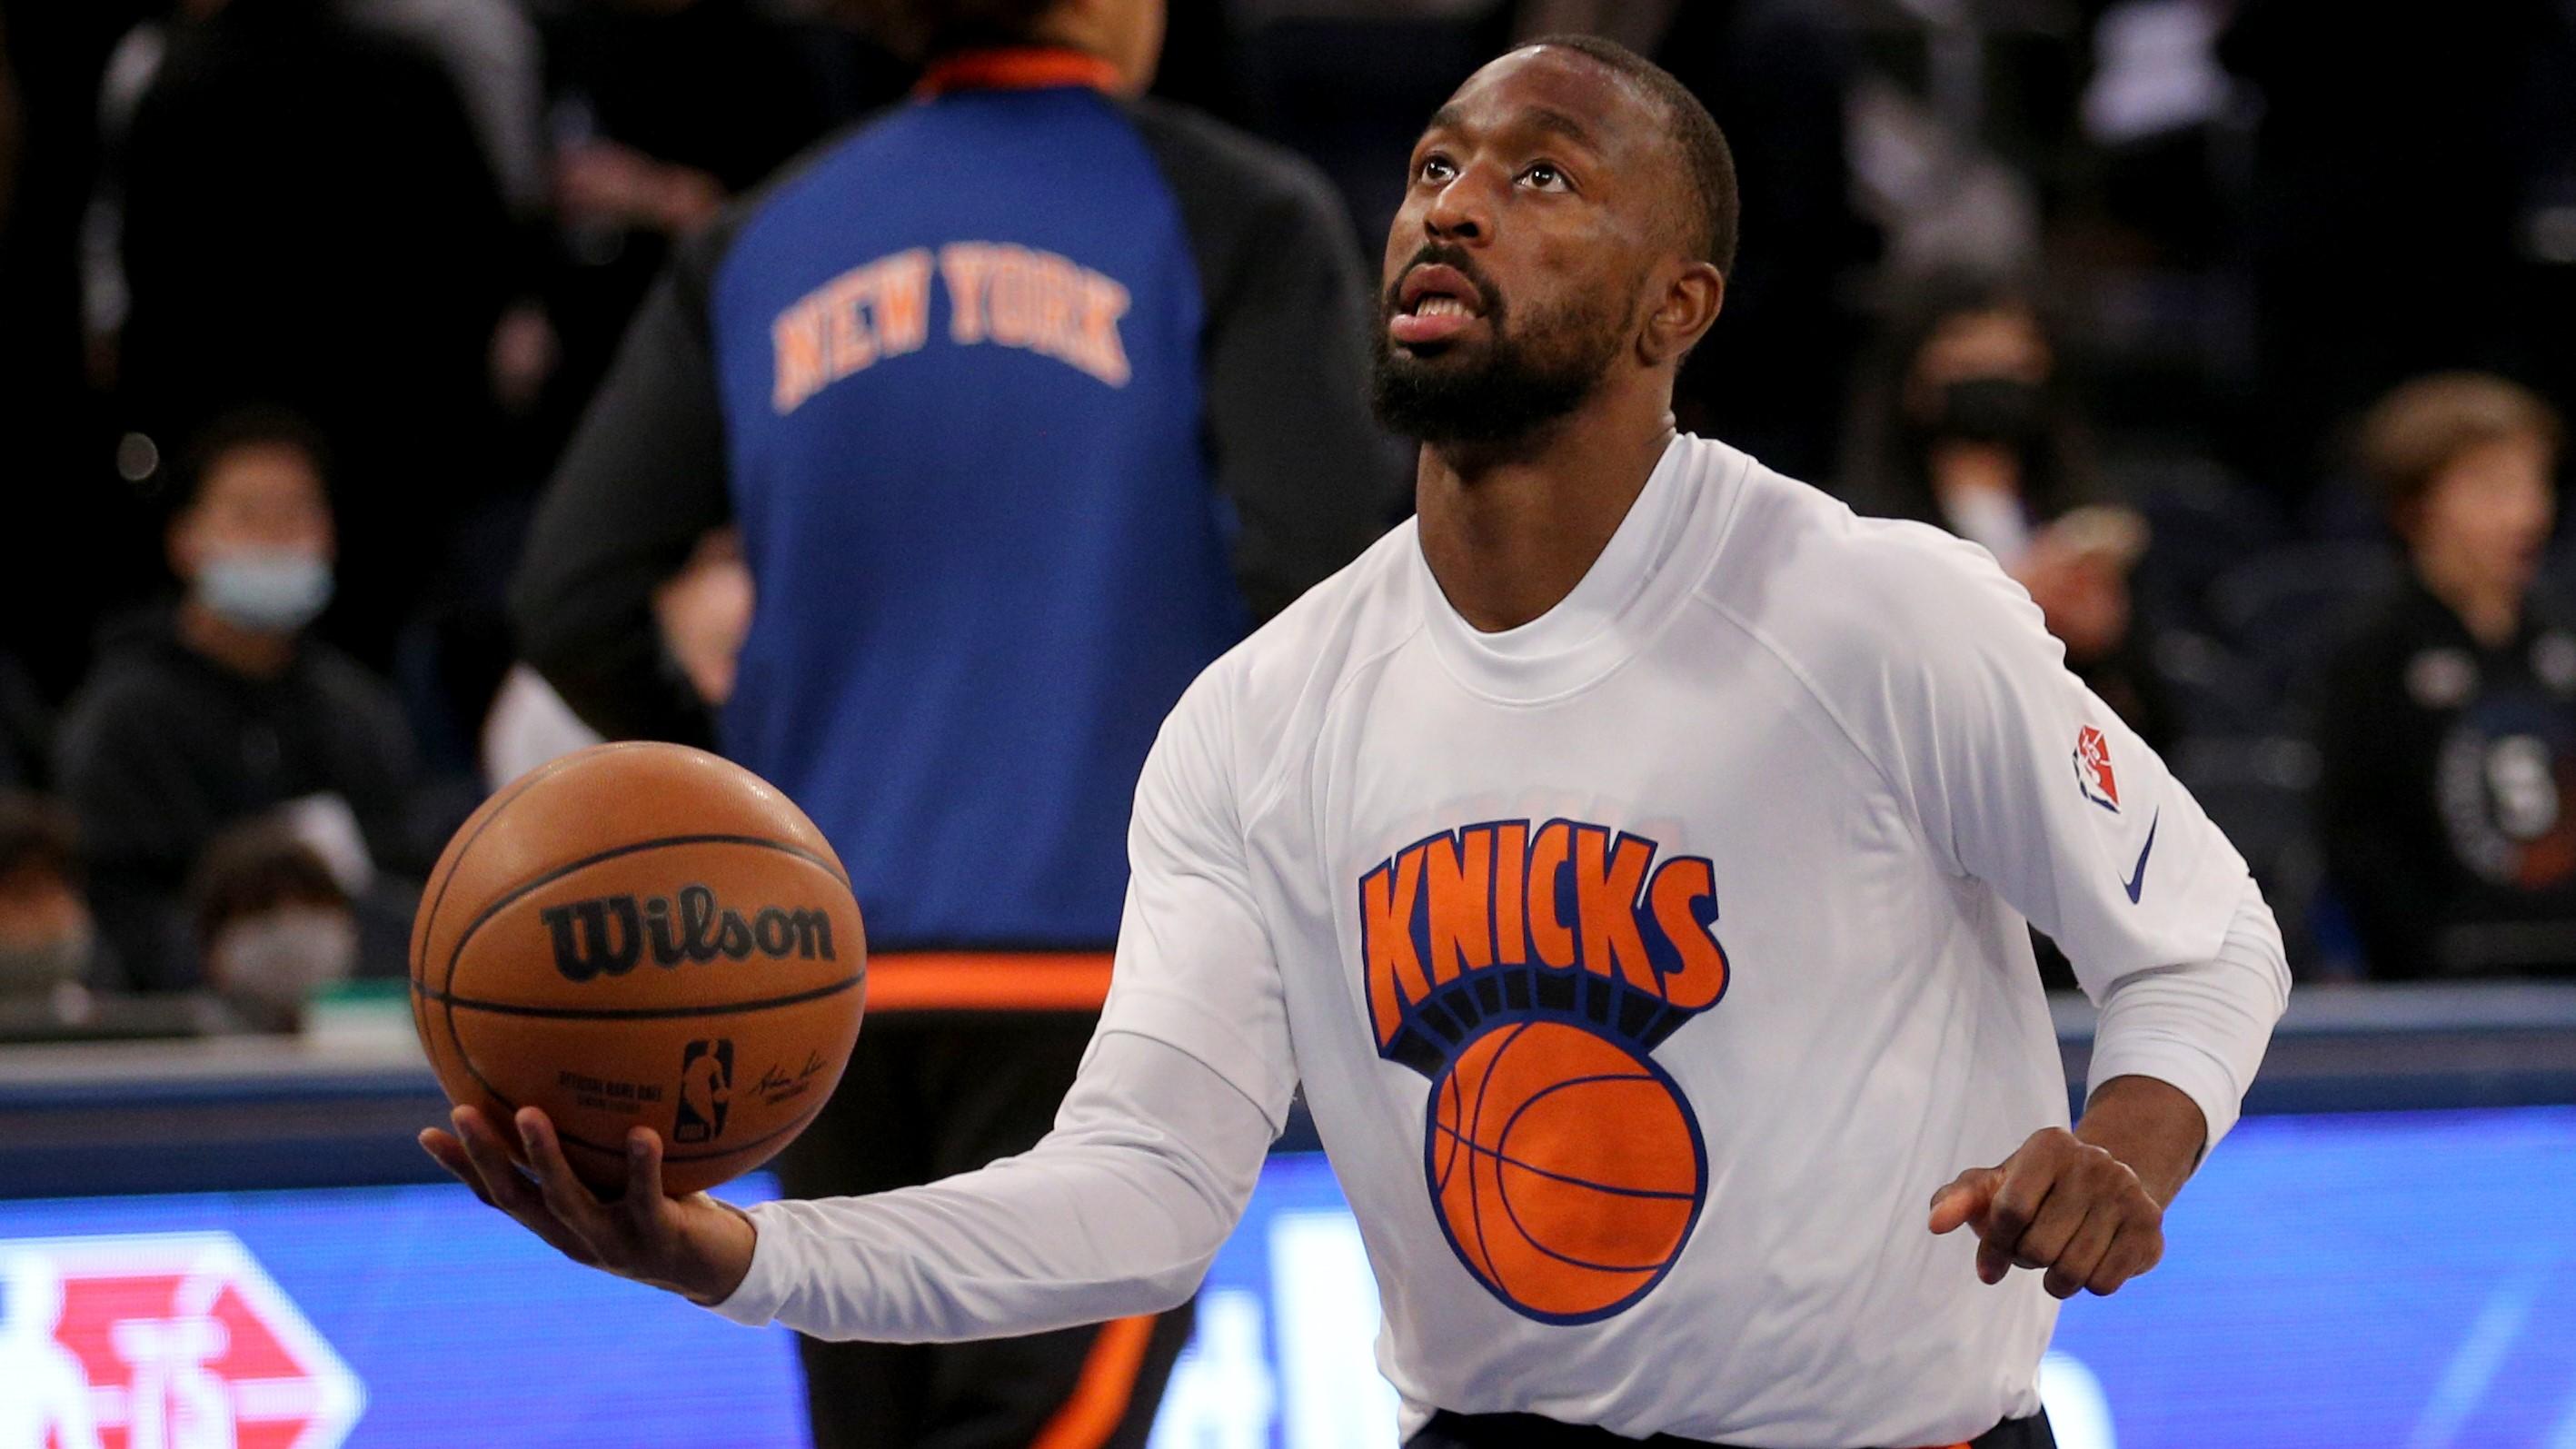 Nov 23, 2021; New York, New York, USA; New York Knicks guard Kemba Walker (8) warms up before a game against the Los Angeles Lakers at Madison Square Garden. Mandatory Credit: Brad Penner-USA TODAY Sports / Brad Penner-USA TODAY Sports